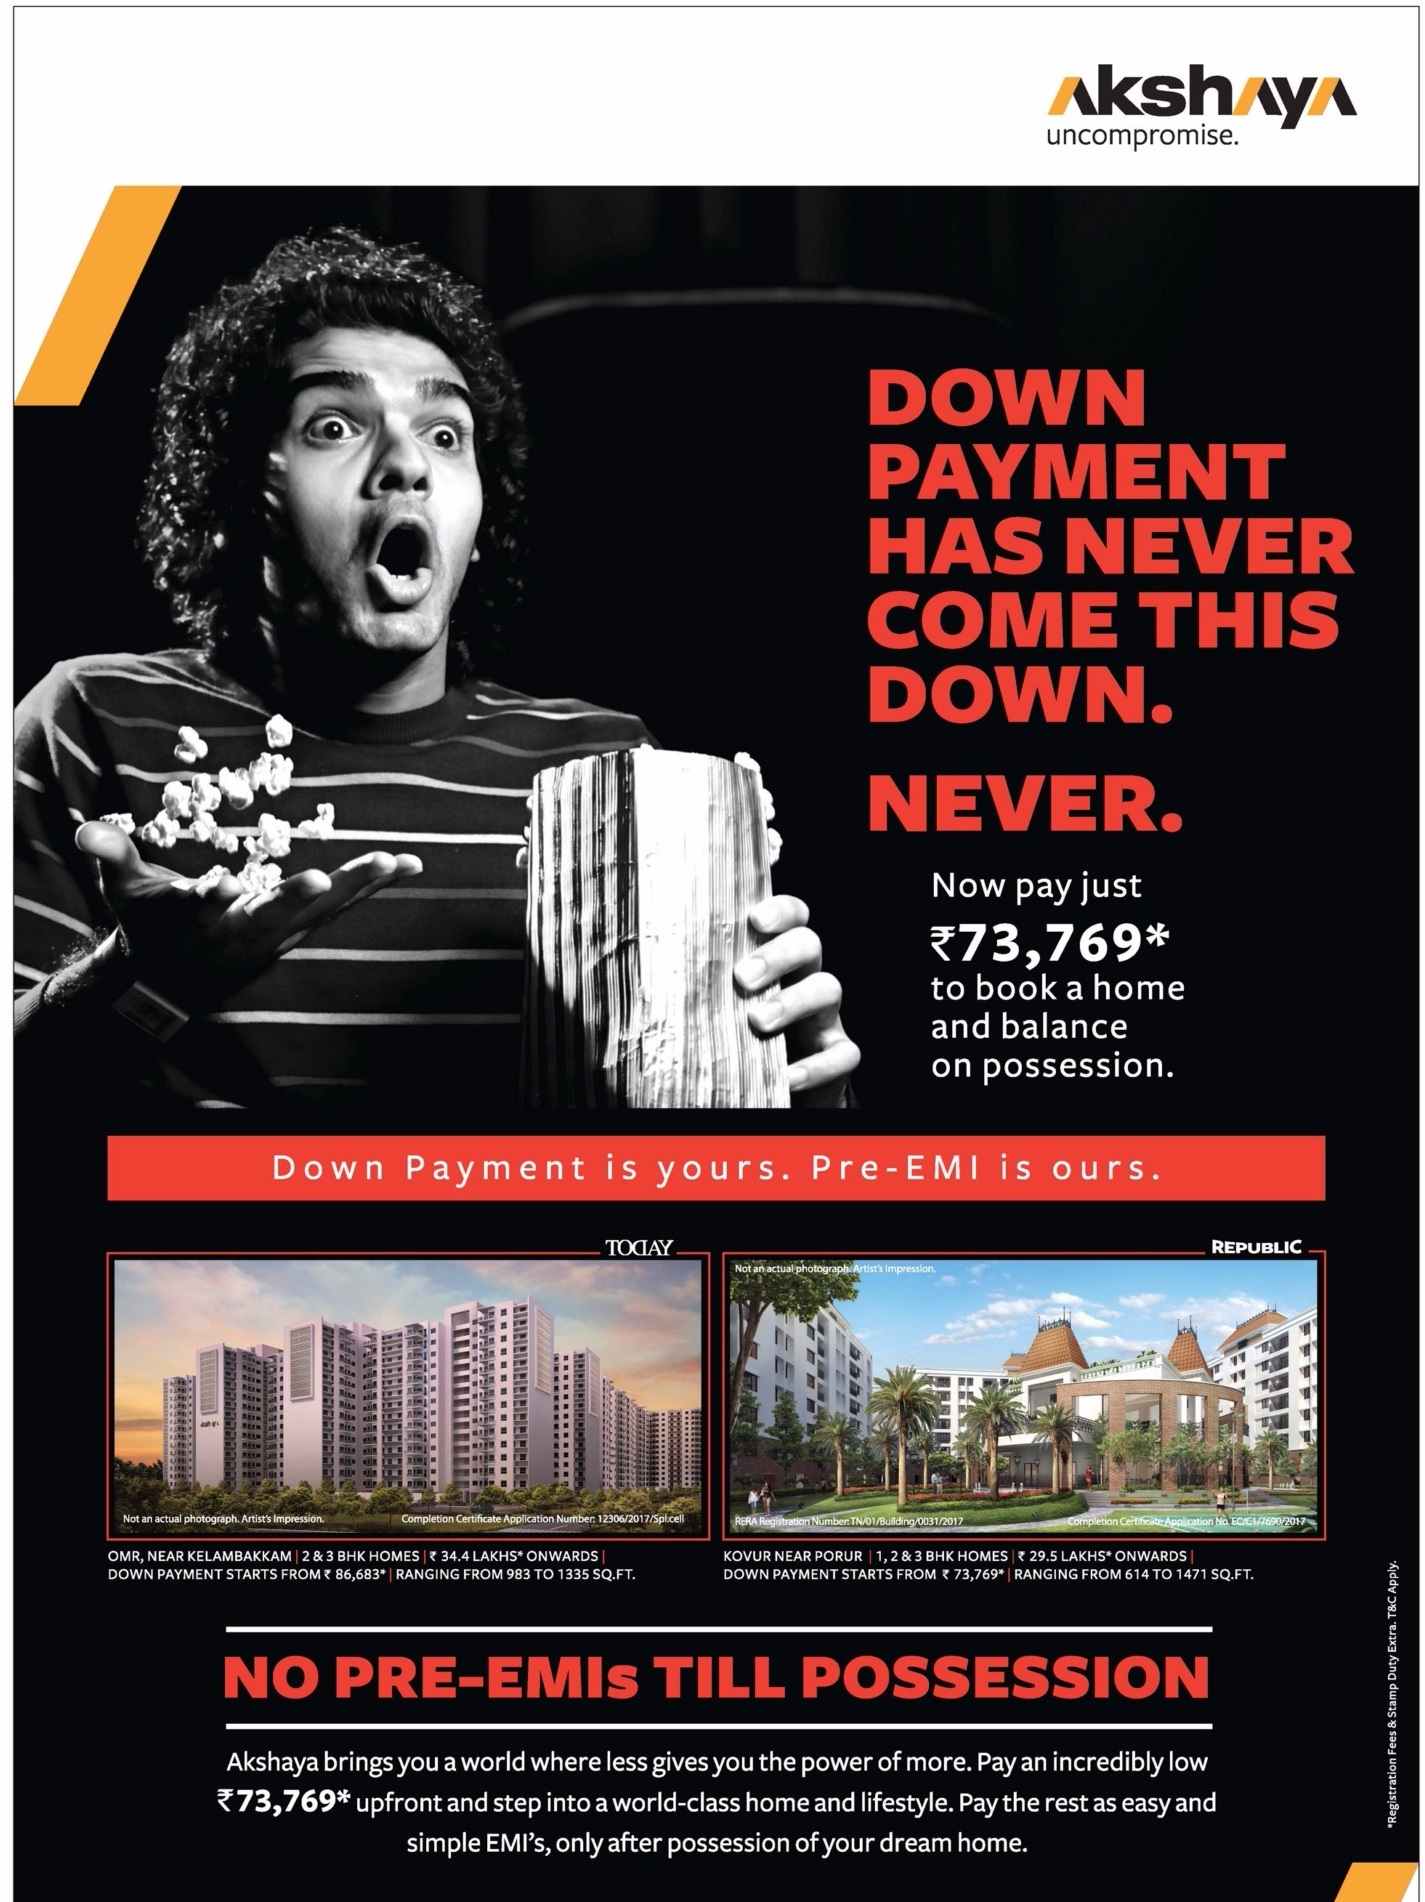 Down payment has never come this down at Akshaya Projects, Chennai